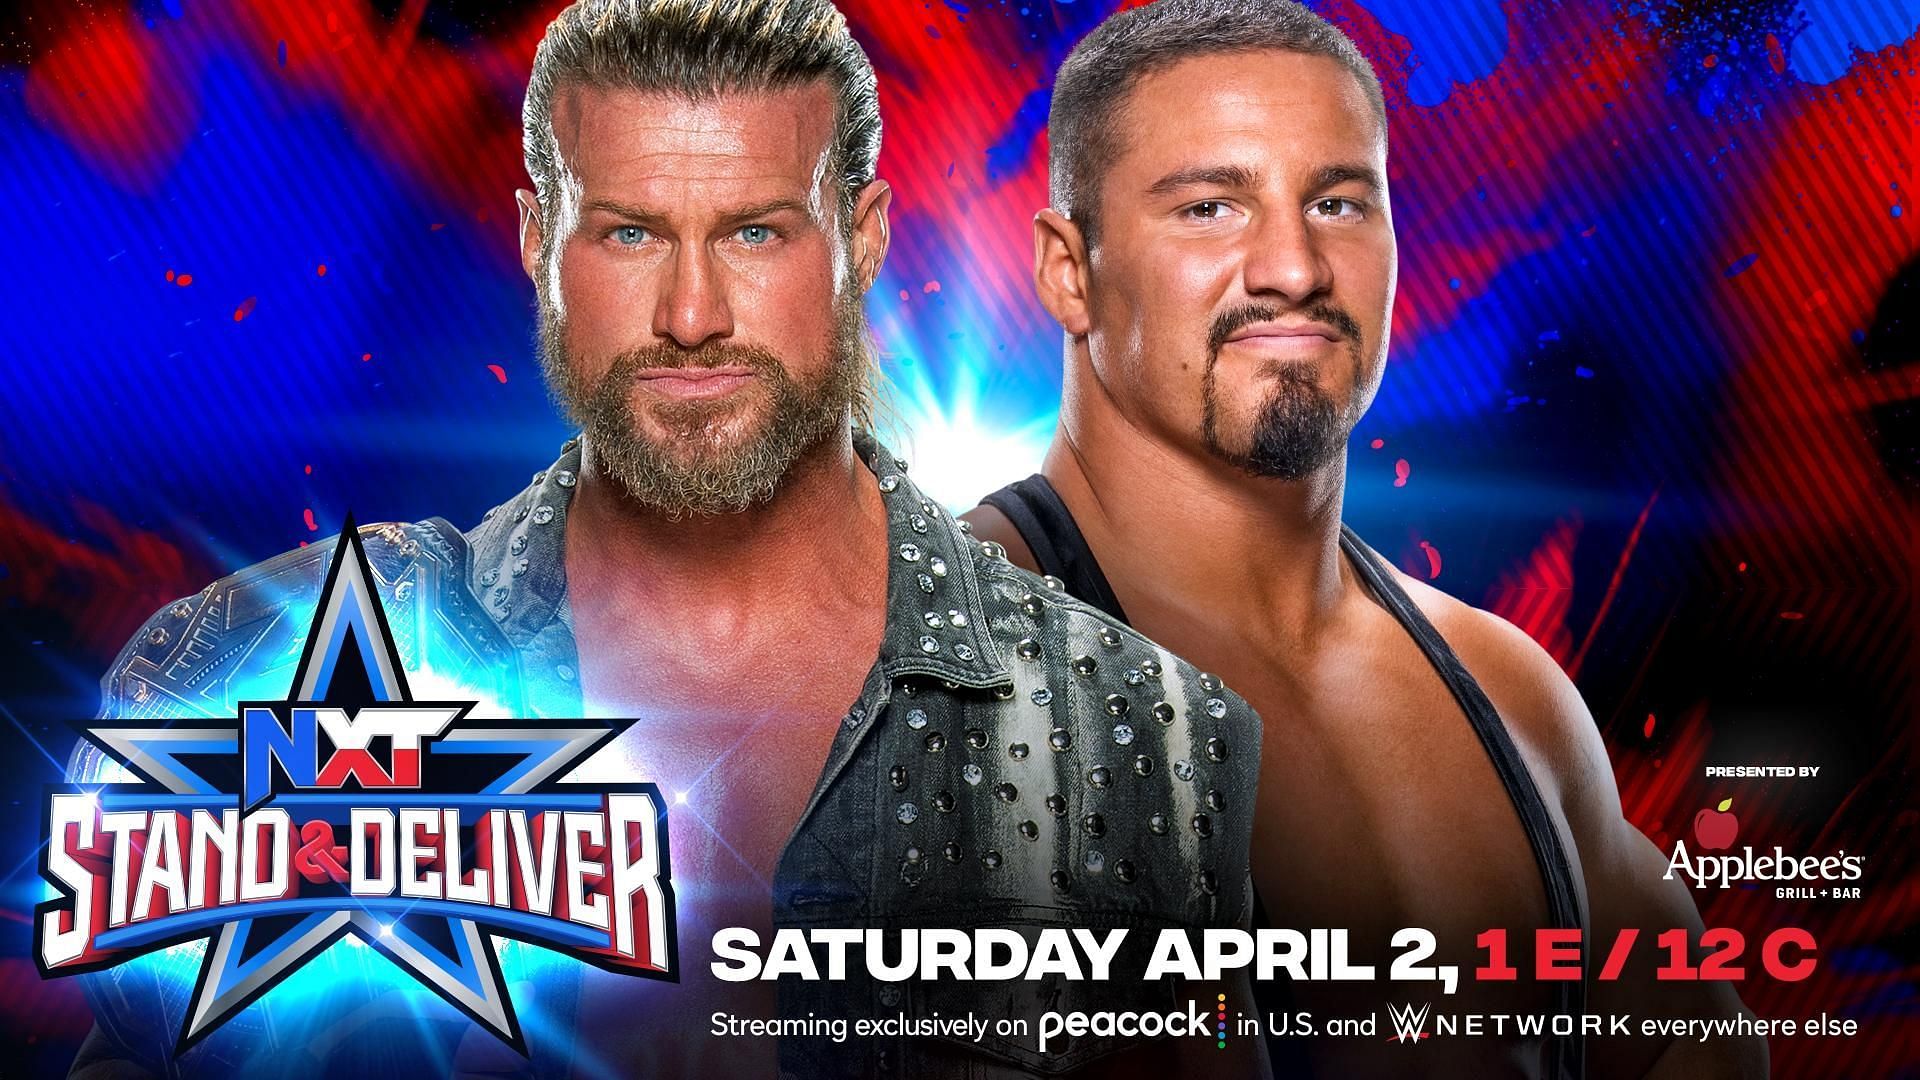 WWE NXT Stand &amp; Deliver will take place on WrestleMania Saturday